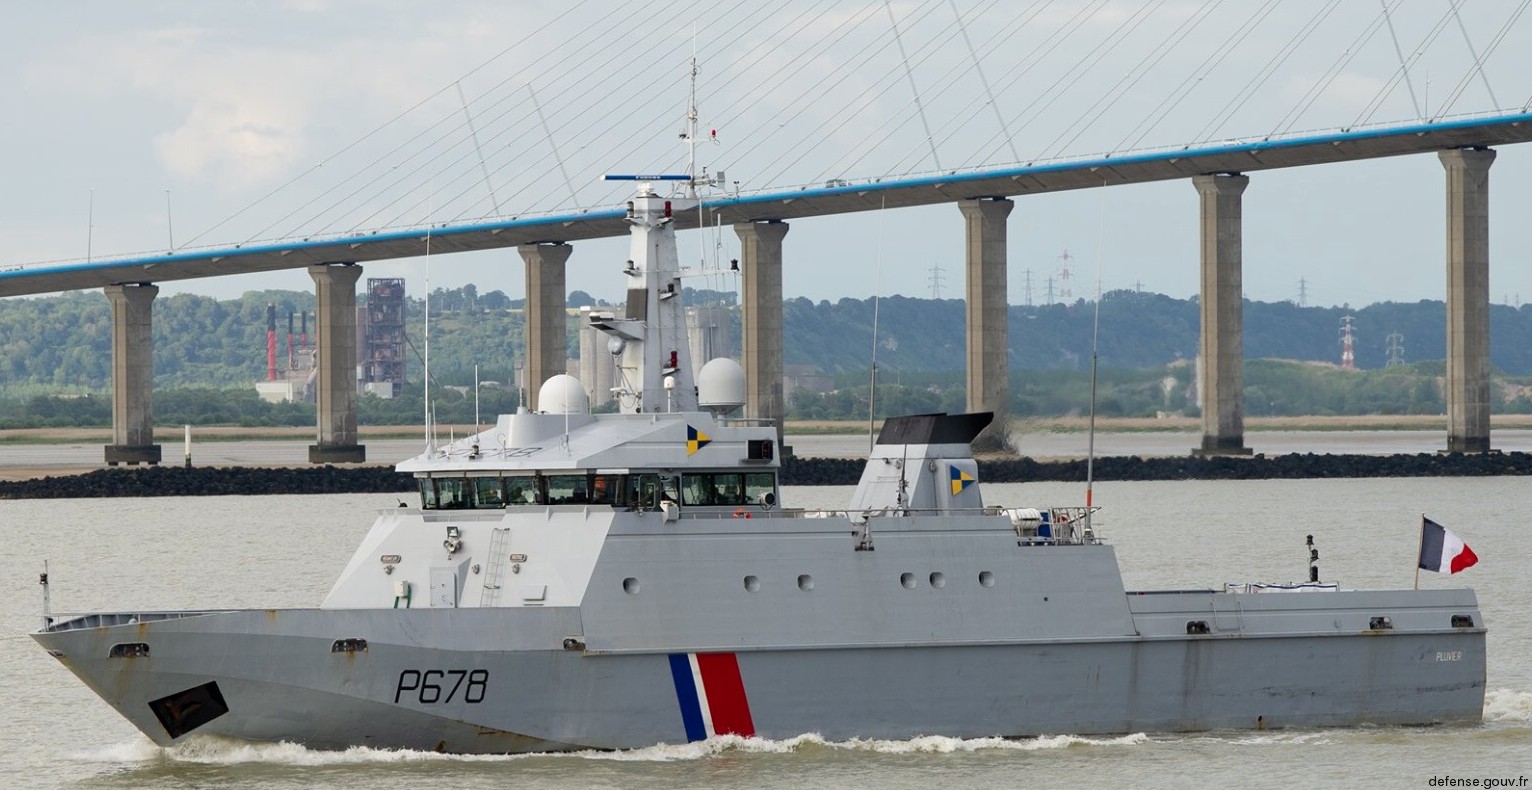 p-678 pluvier flamant class offshore patrol vessel opv french navy patrouilleur marine nationale 08